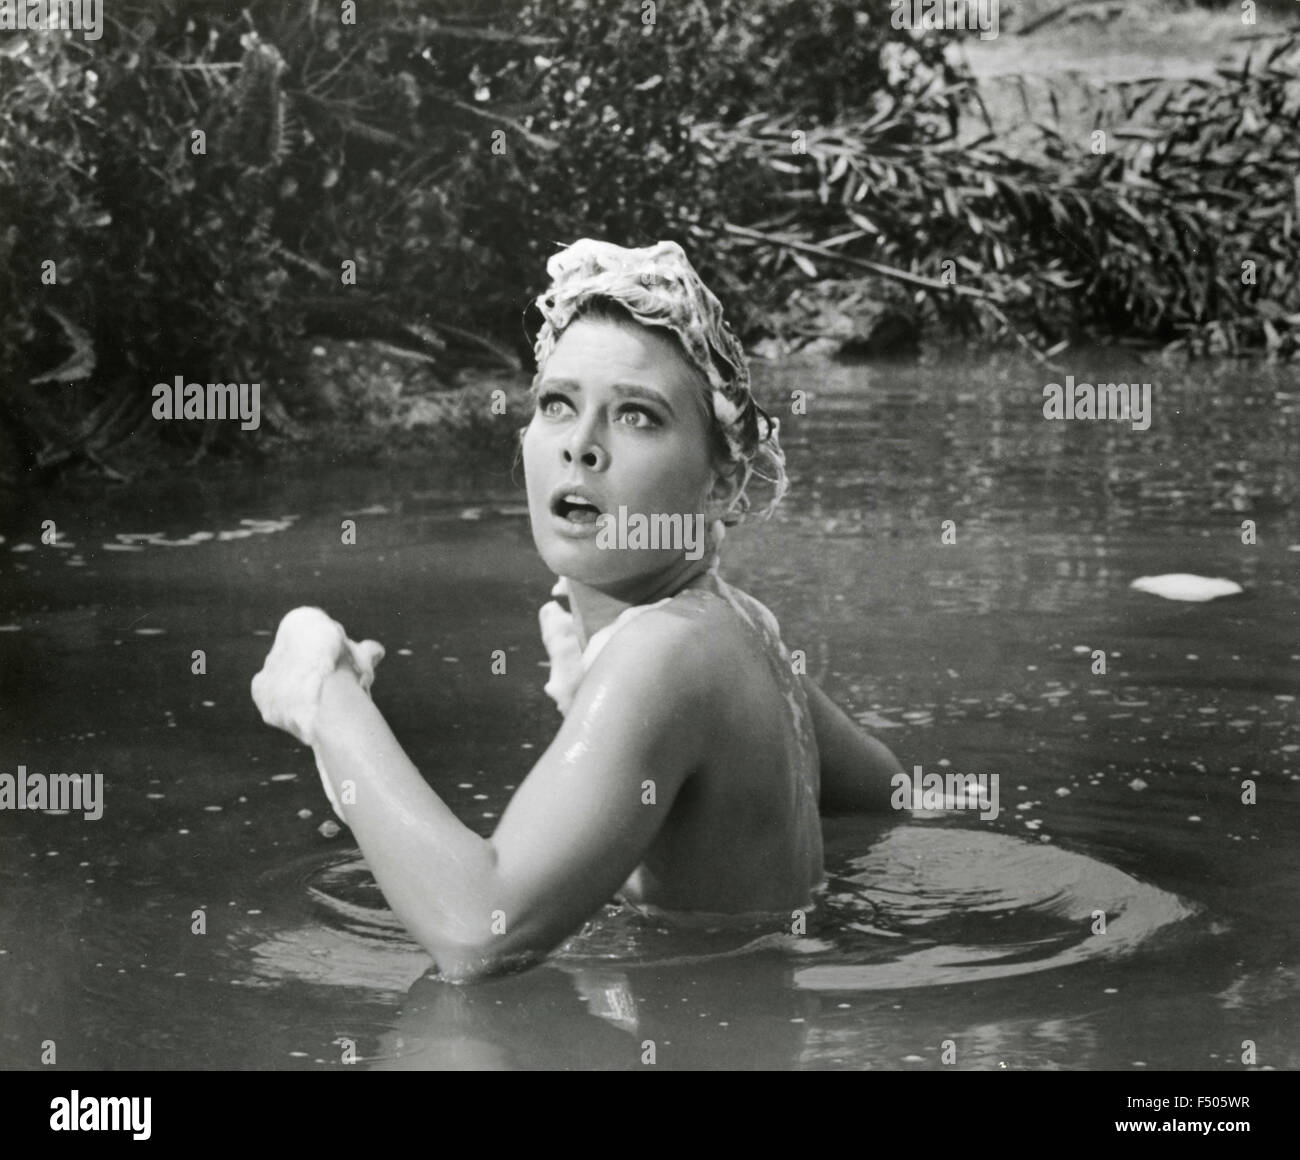 The American actress Rosemary Forsyth takes a bath in a scene from the movie 'Texas across the river', USA Stock Photo